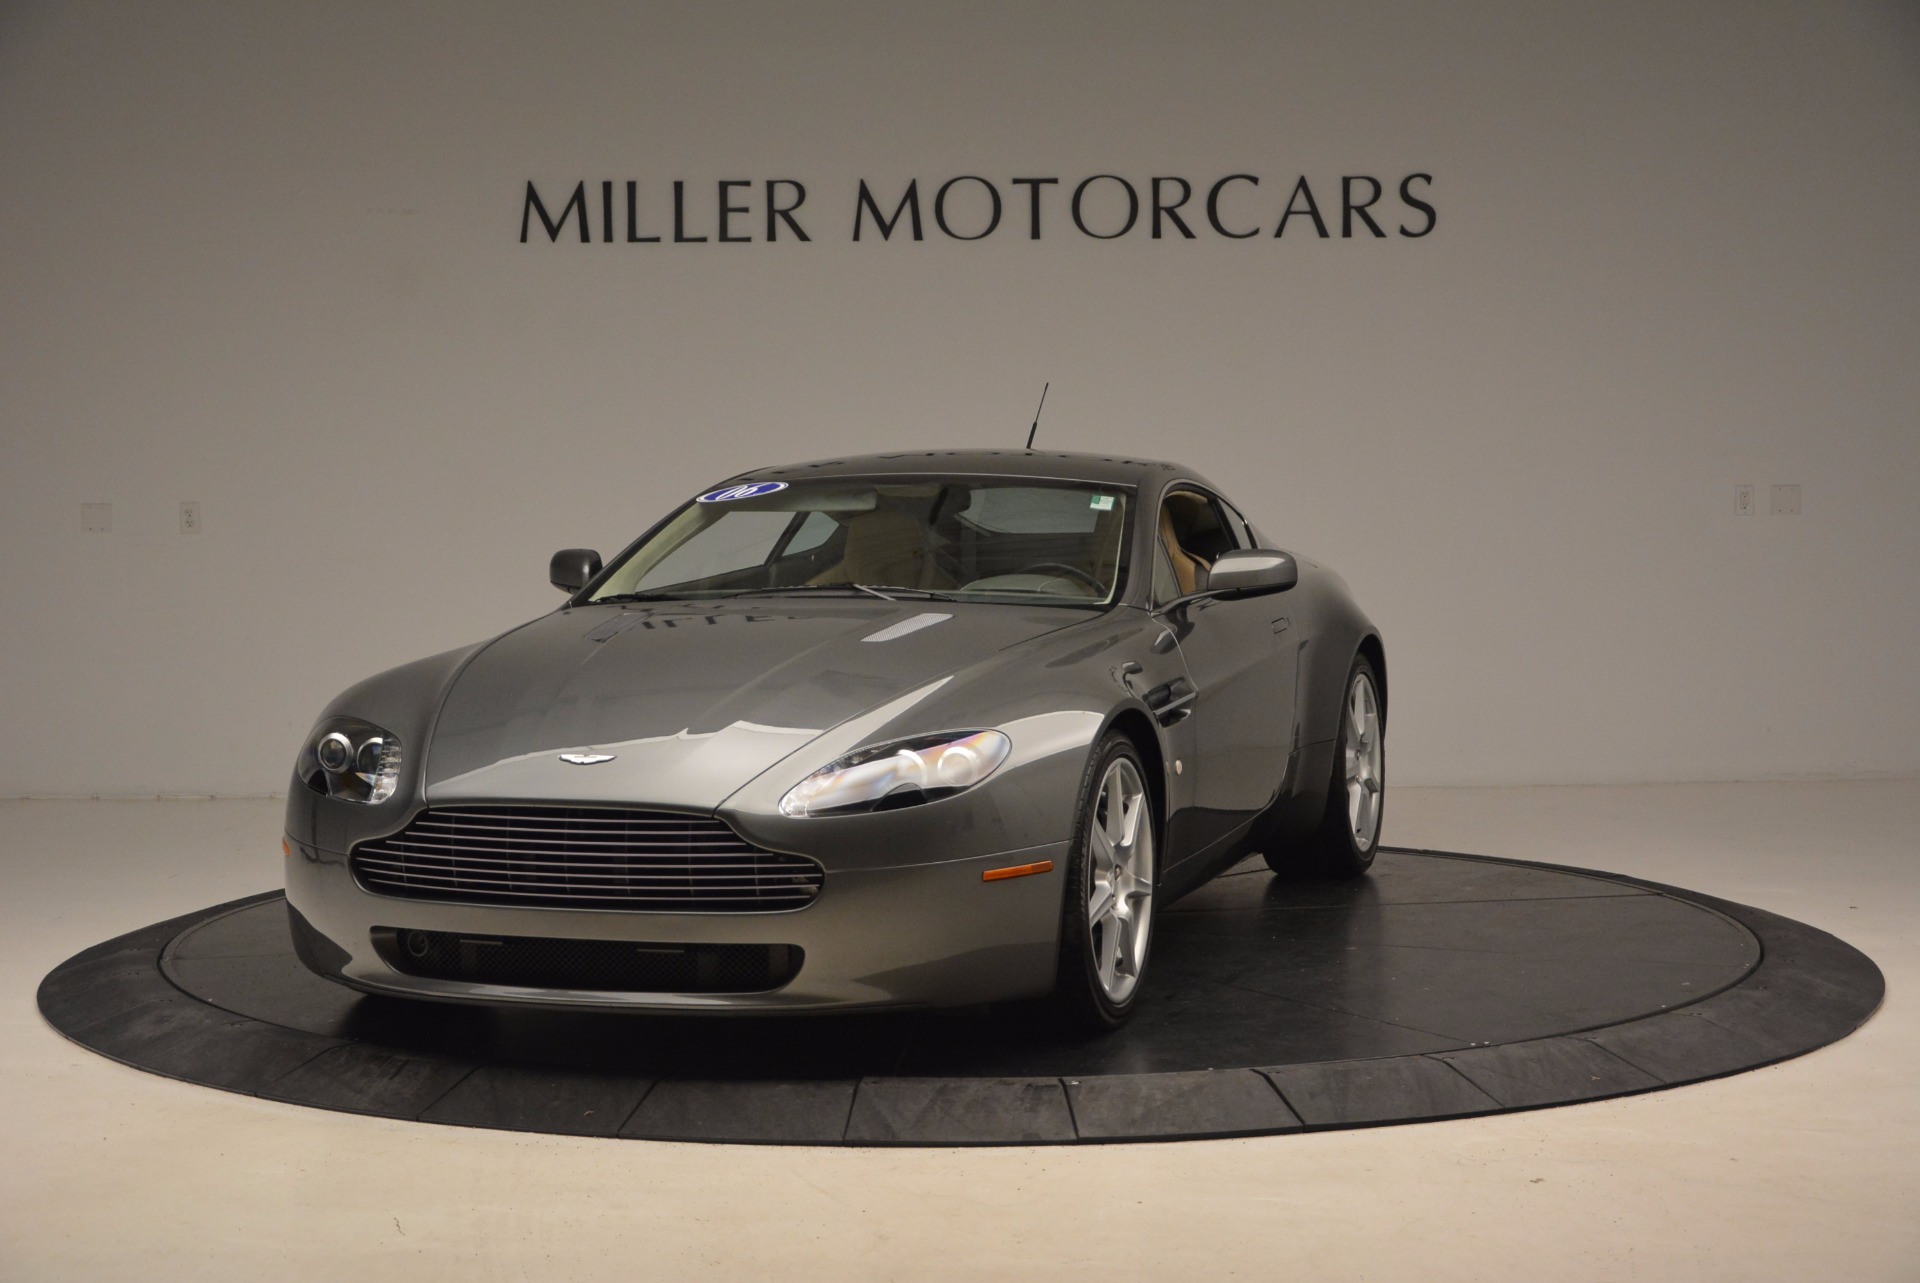 Used 2006 Aston Martin V8 Vantage for sale Sold at Bentley Greenwich in Greenwich CT 06830 1